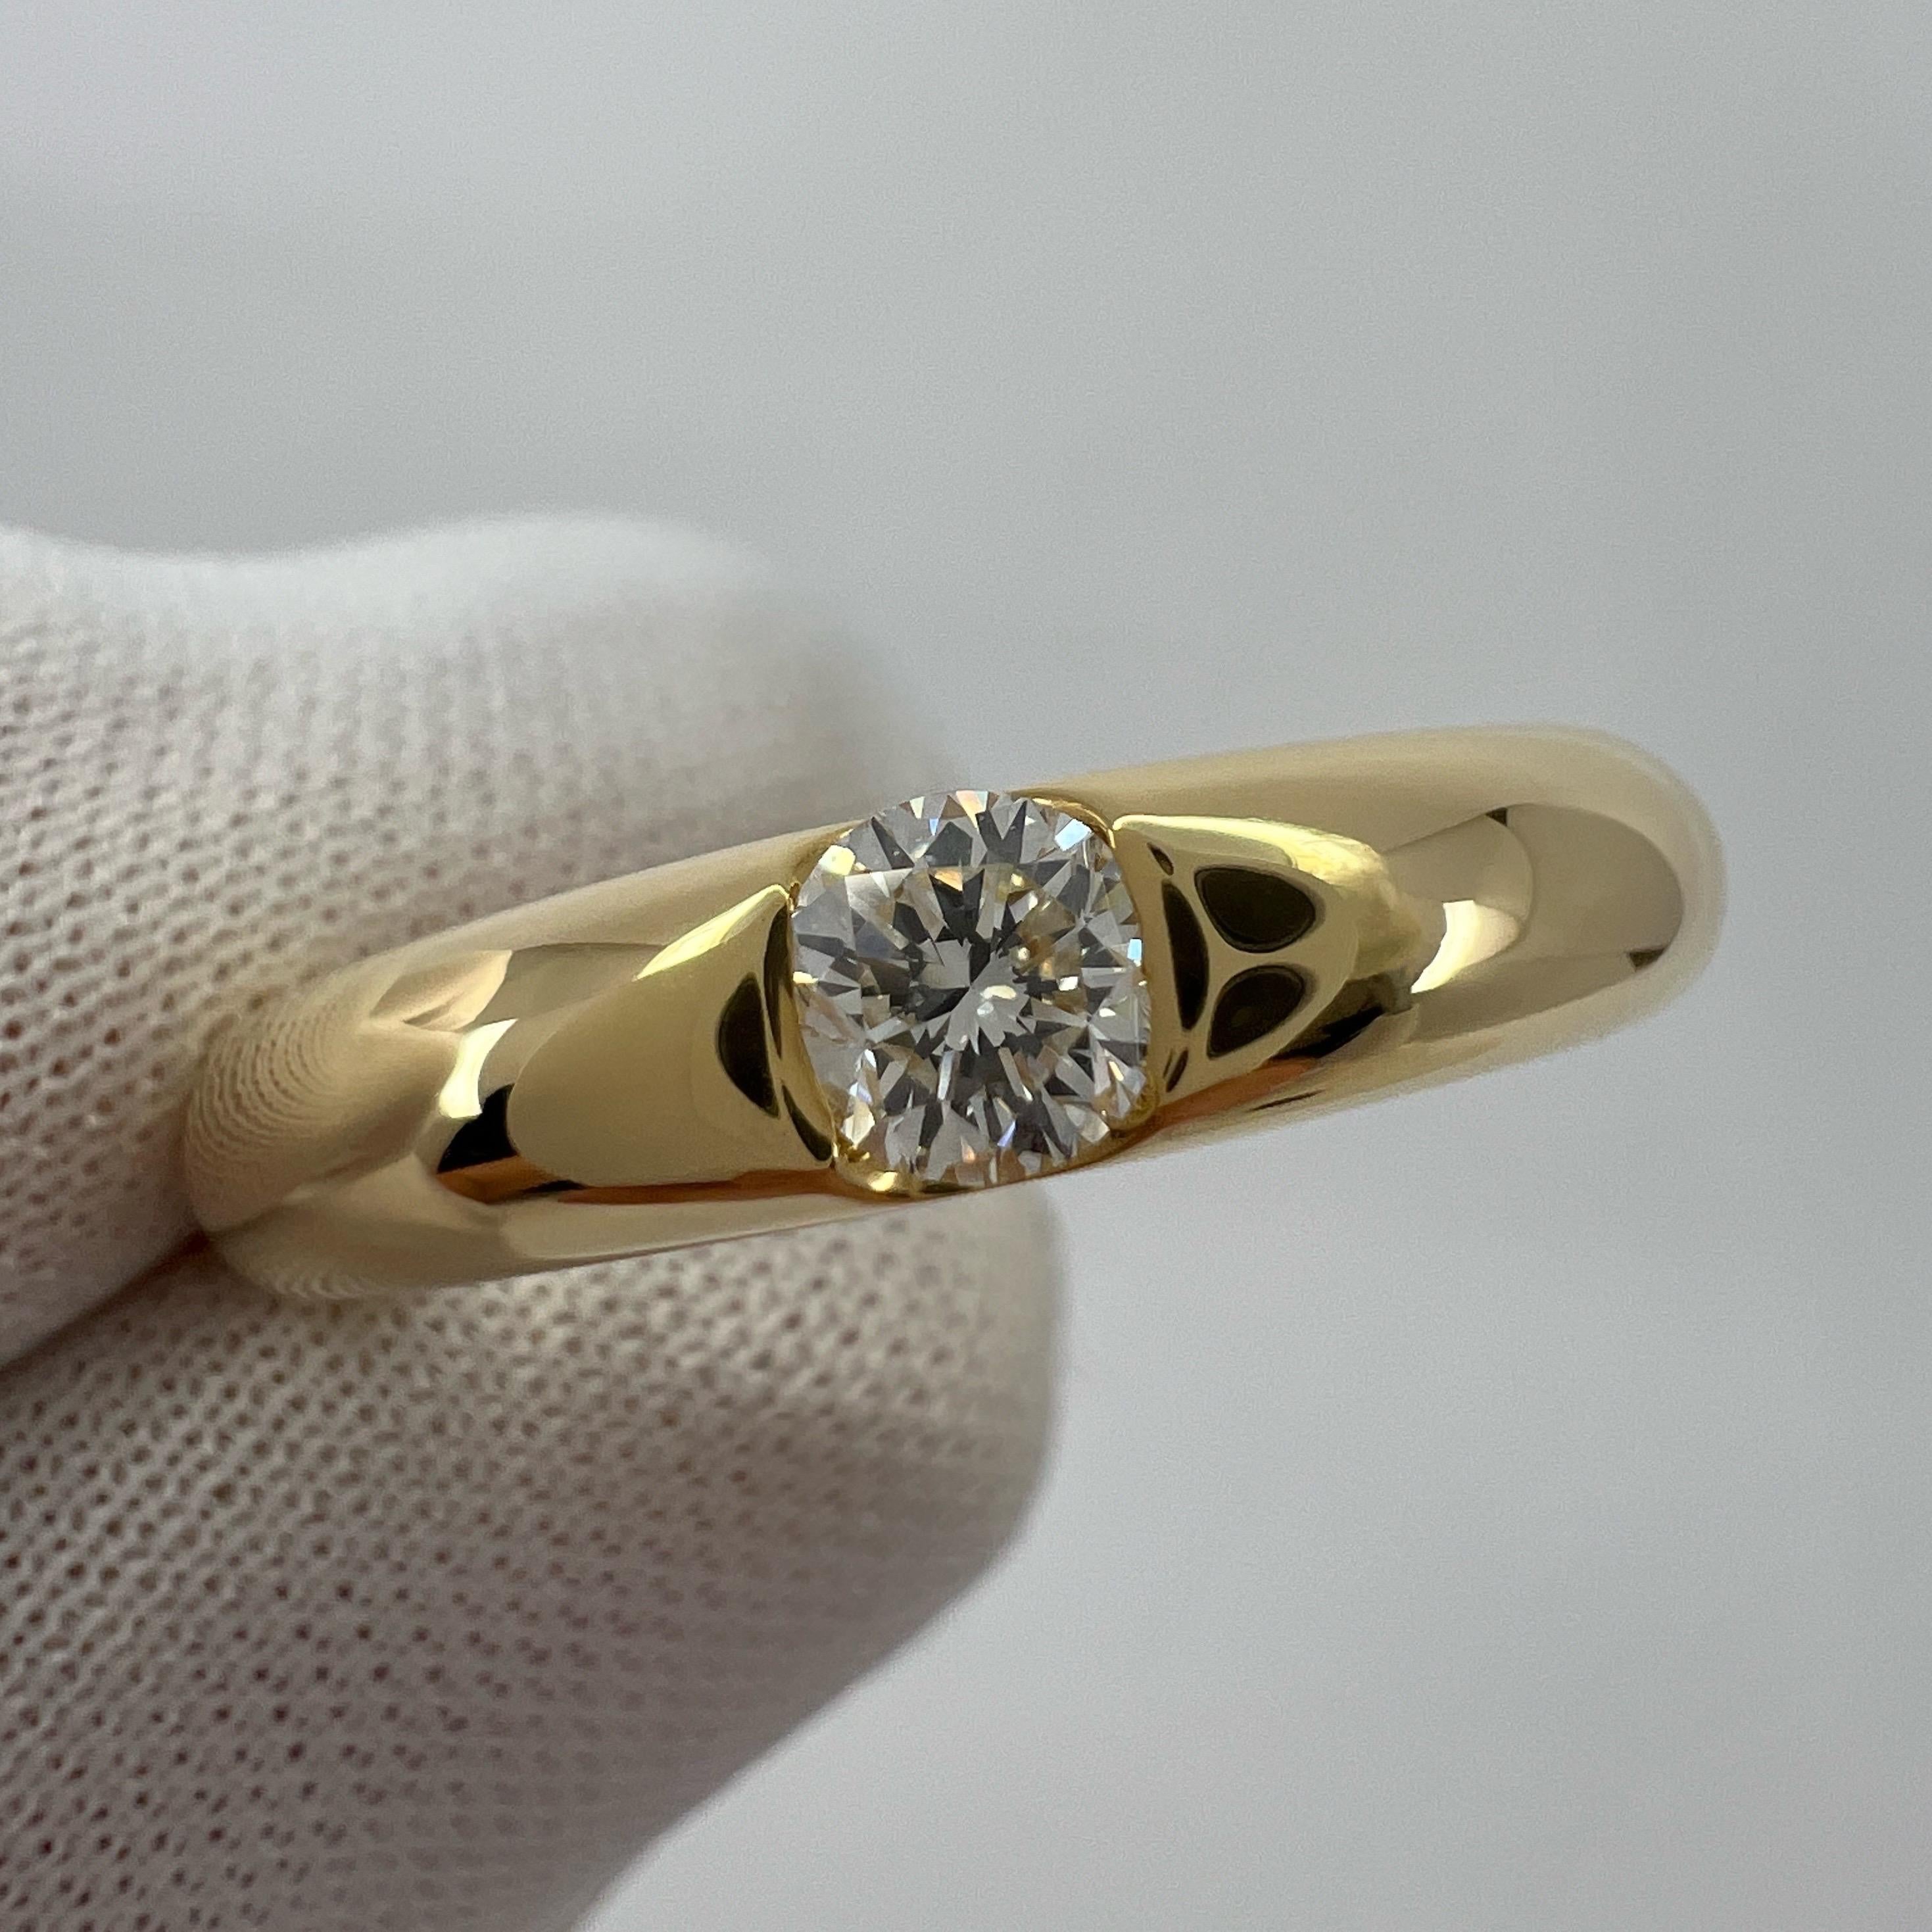 Vintage Cartier Round Diamond Ellipse 18k Yellow Gold Solitaire Band Ring US5 49 2